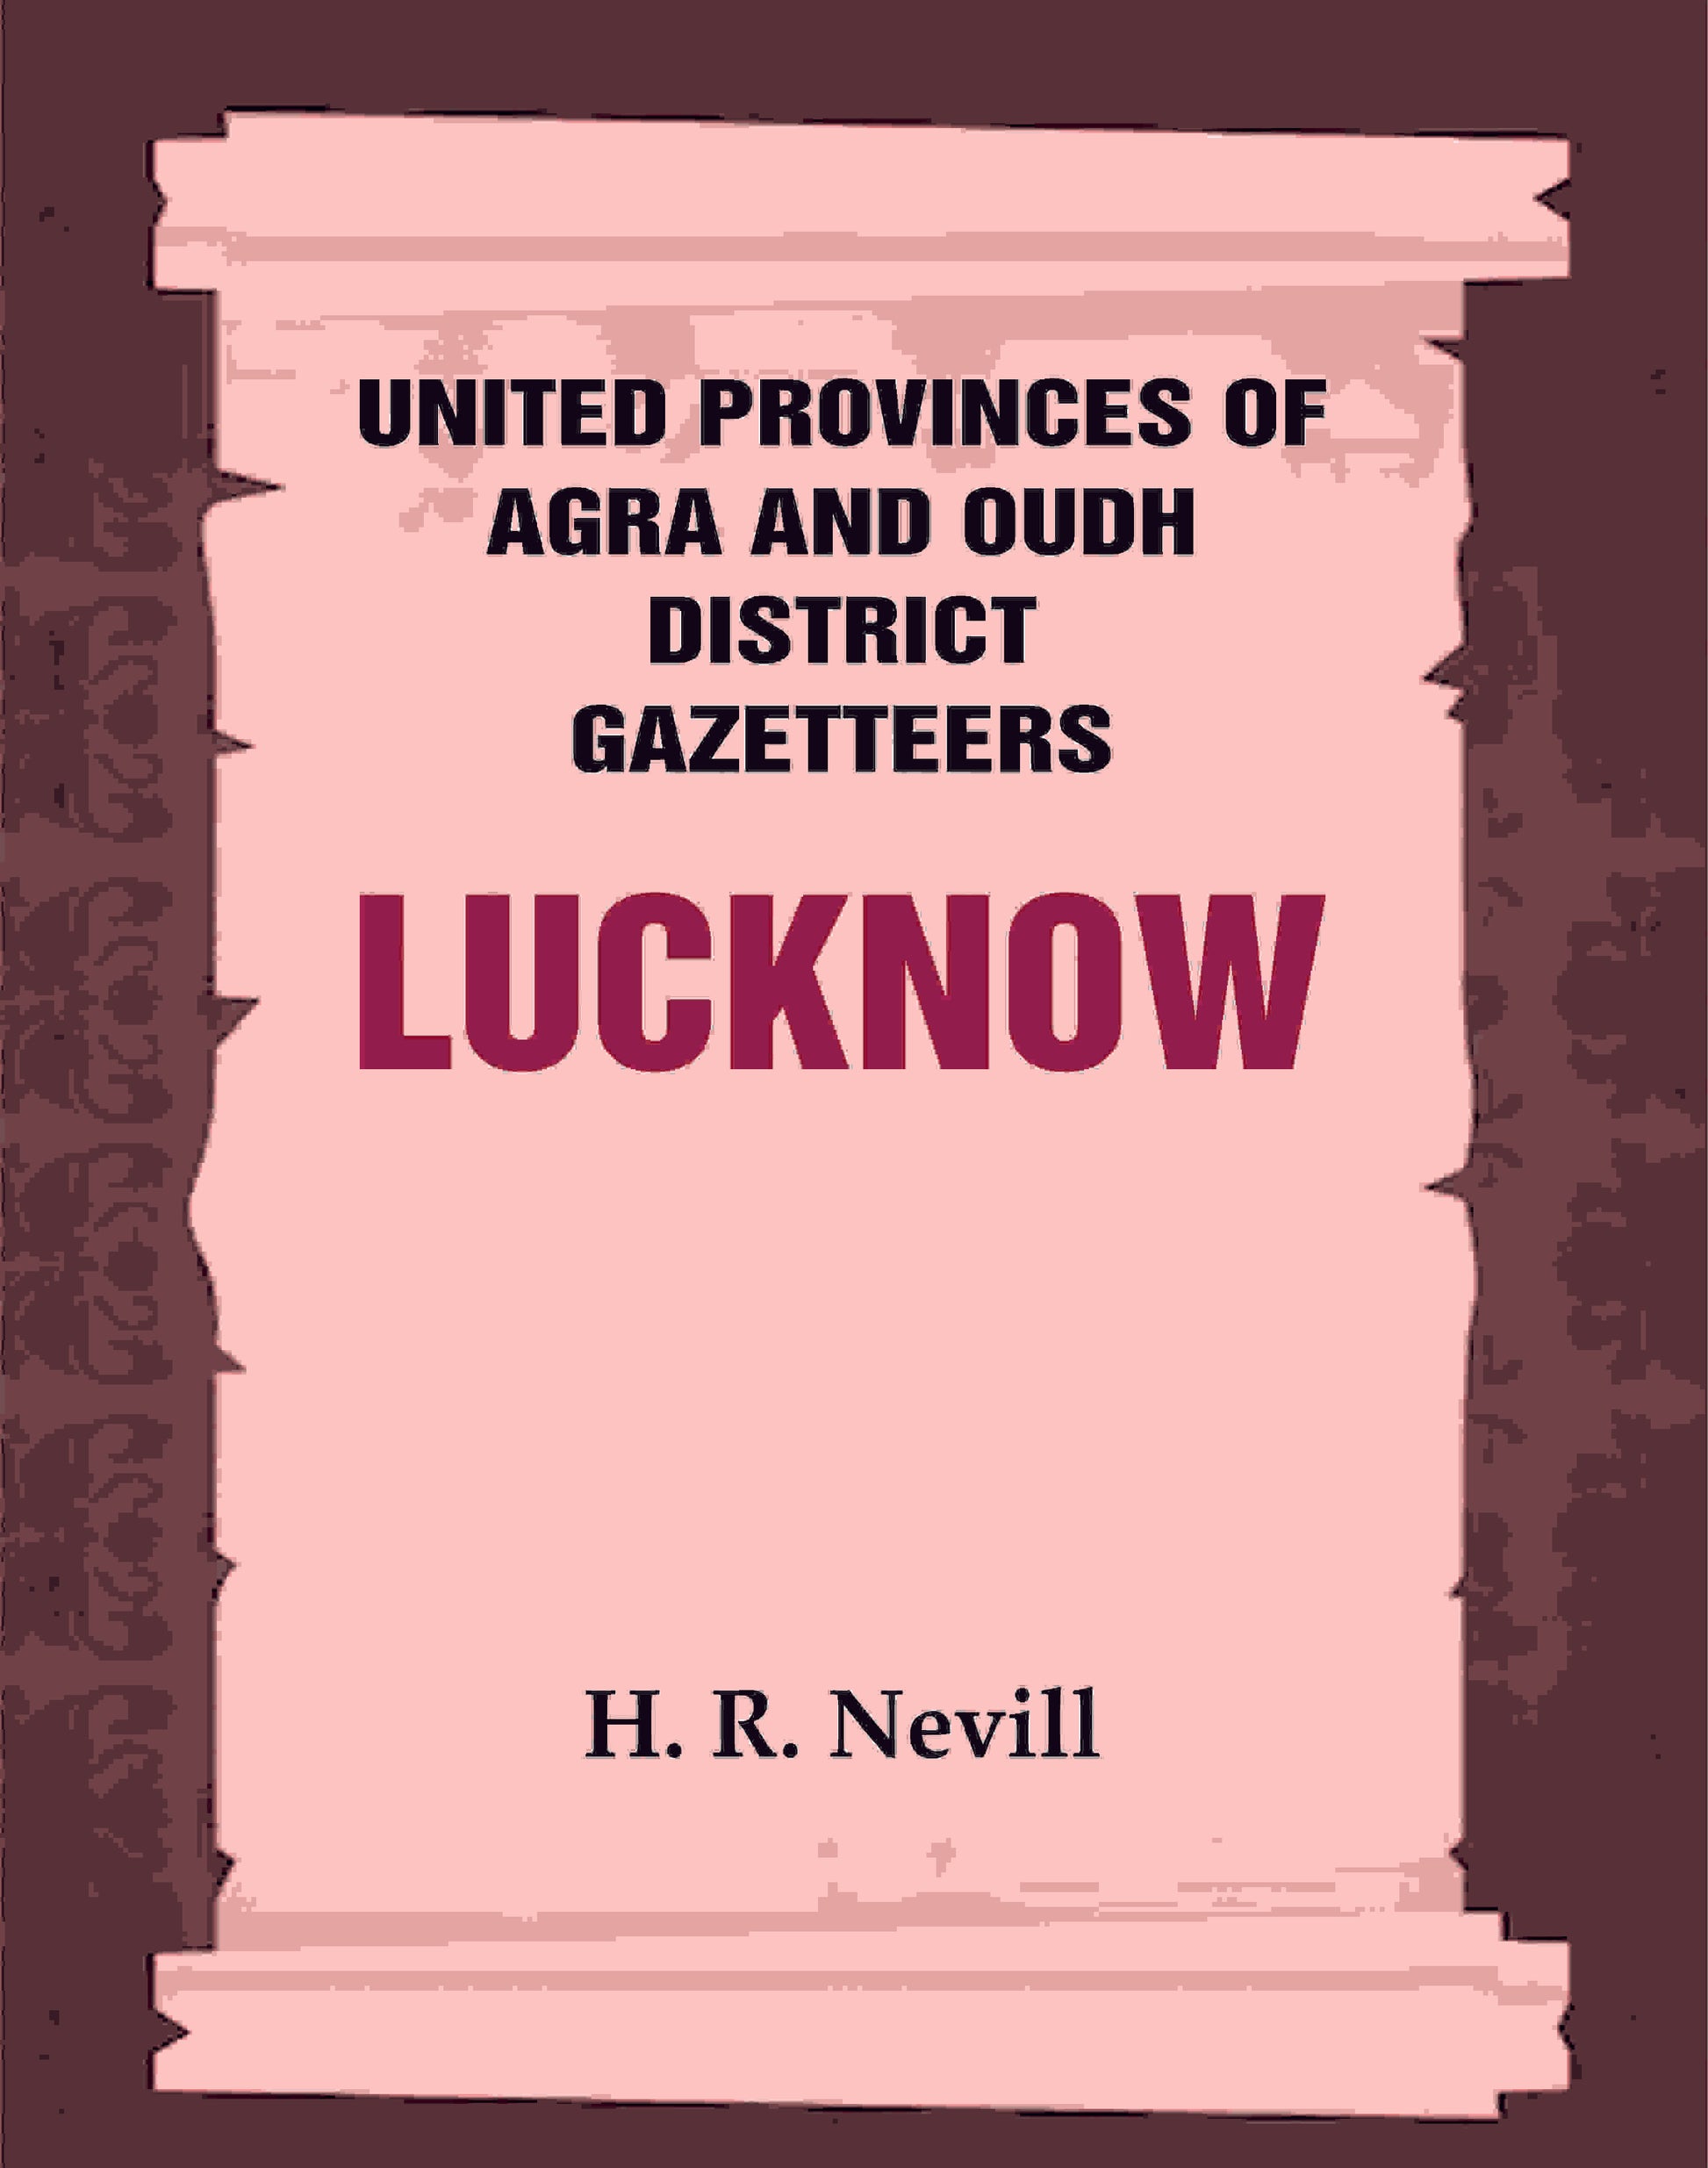 United Provinces of Agra and Oudh District Gazetteers: Lucknow